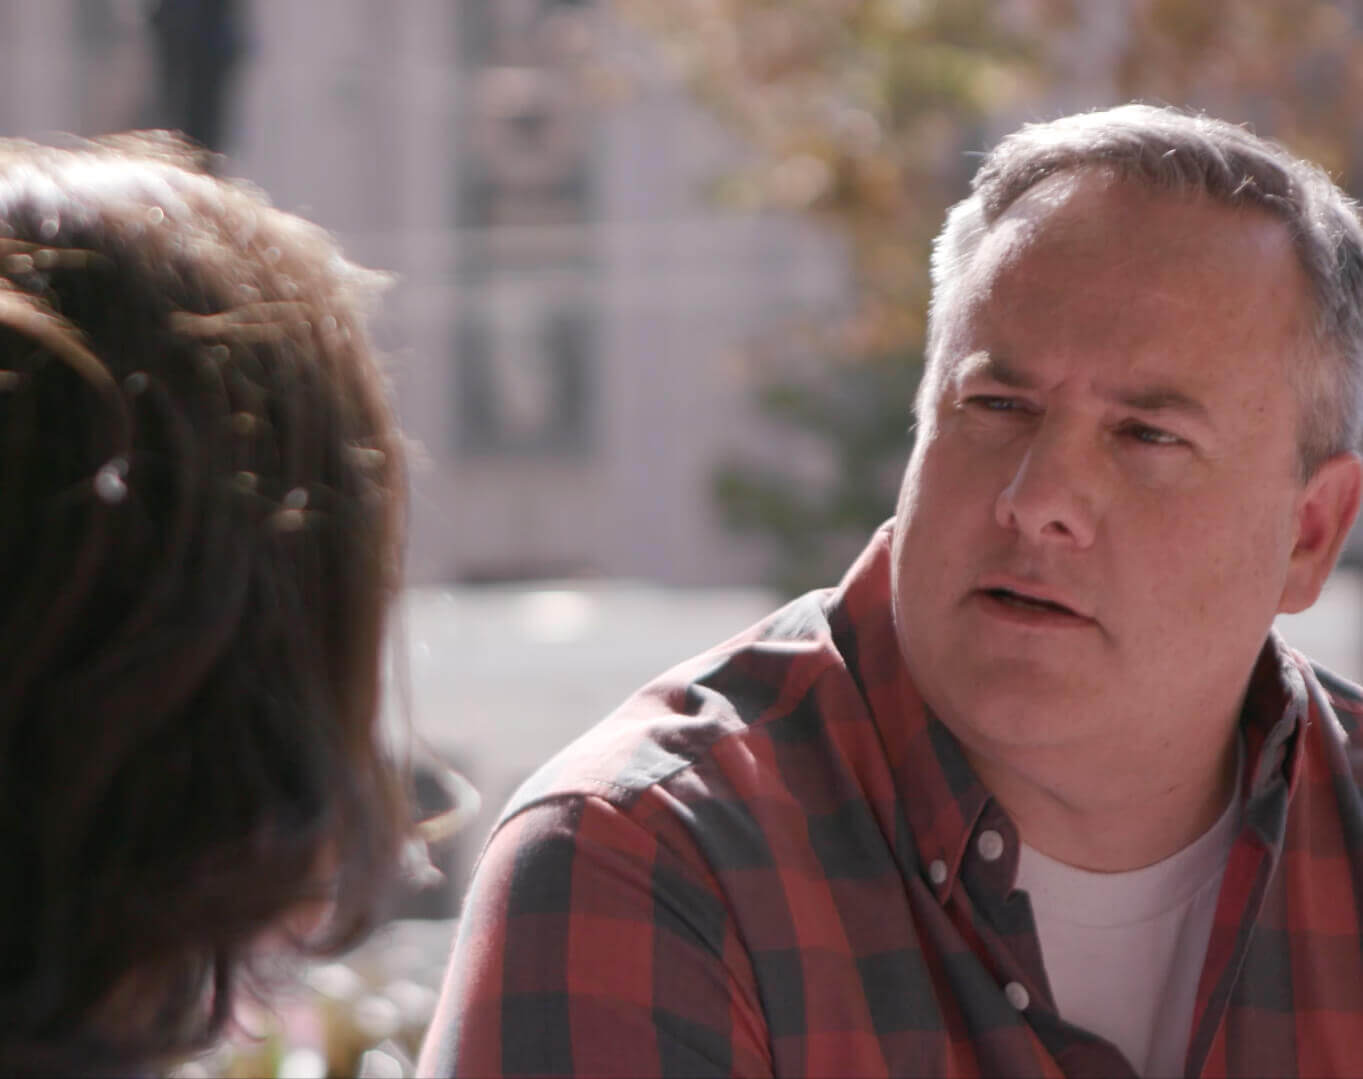 Man In a Red And Black Plaid Shirt Talking To a Woman Outside